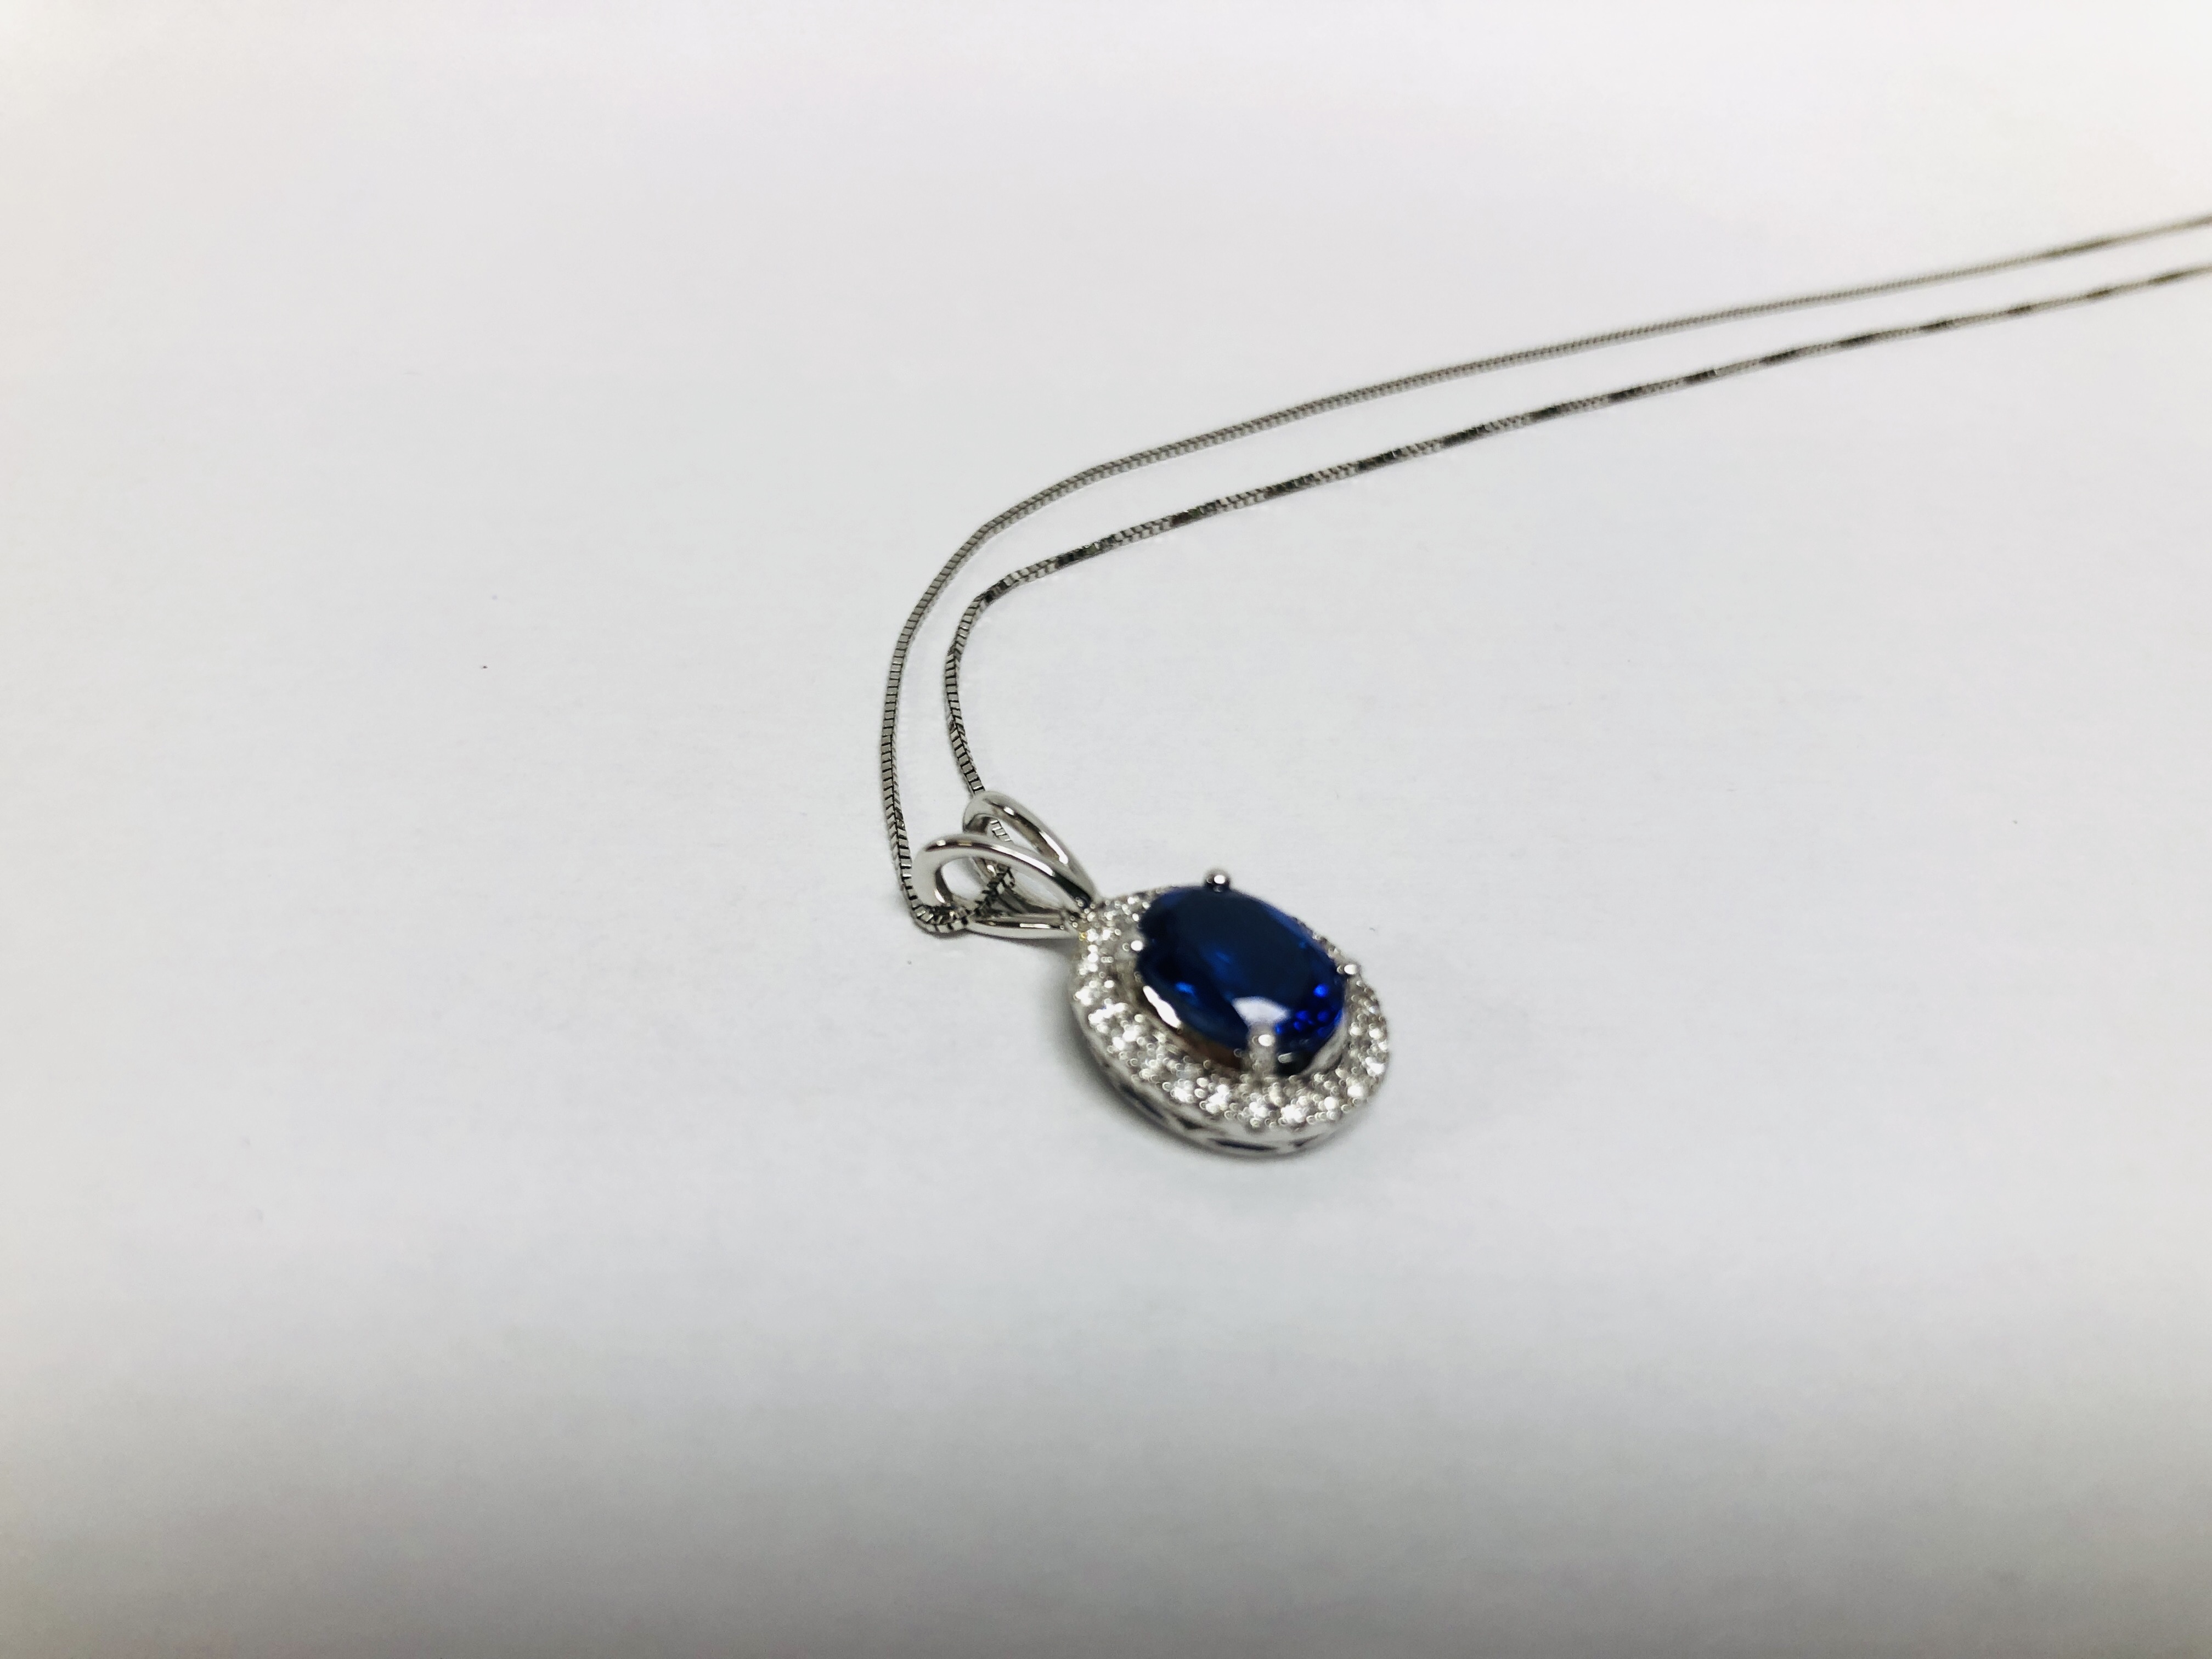 A PENDANT NECKLACE MARKED 750 THE PRINCIPLE BLUE STONE SURROUNDED BY DIAMONDS - Image 3 of 6